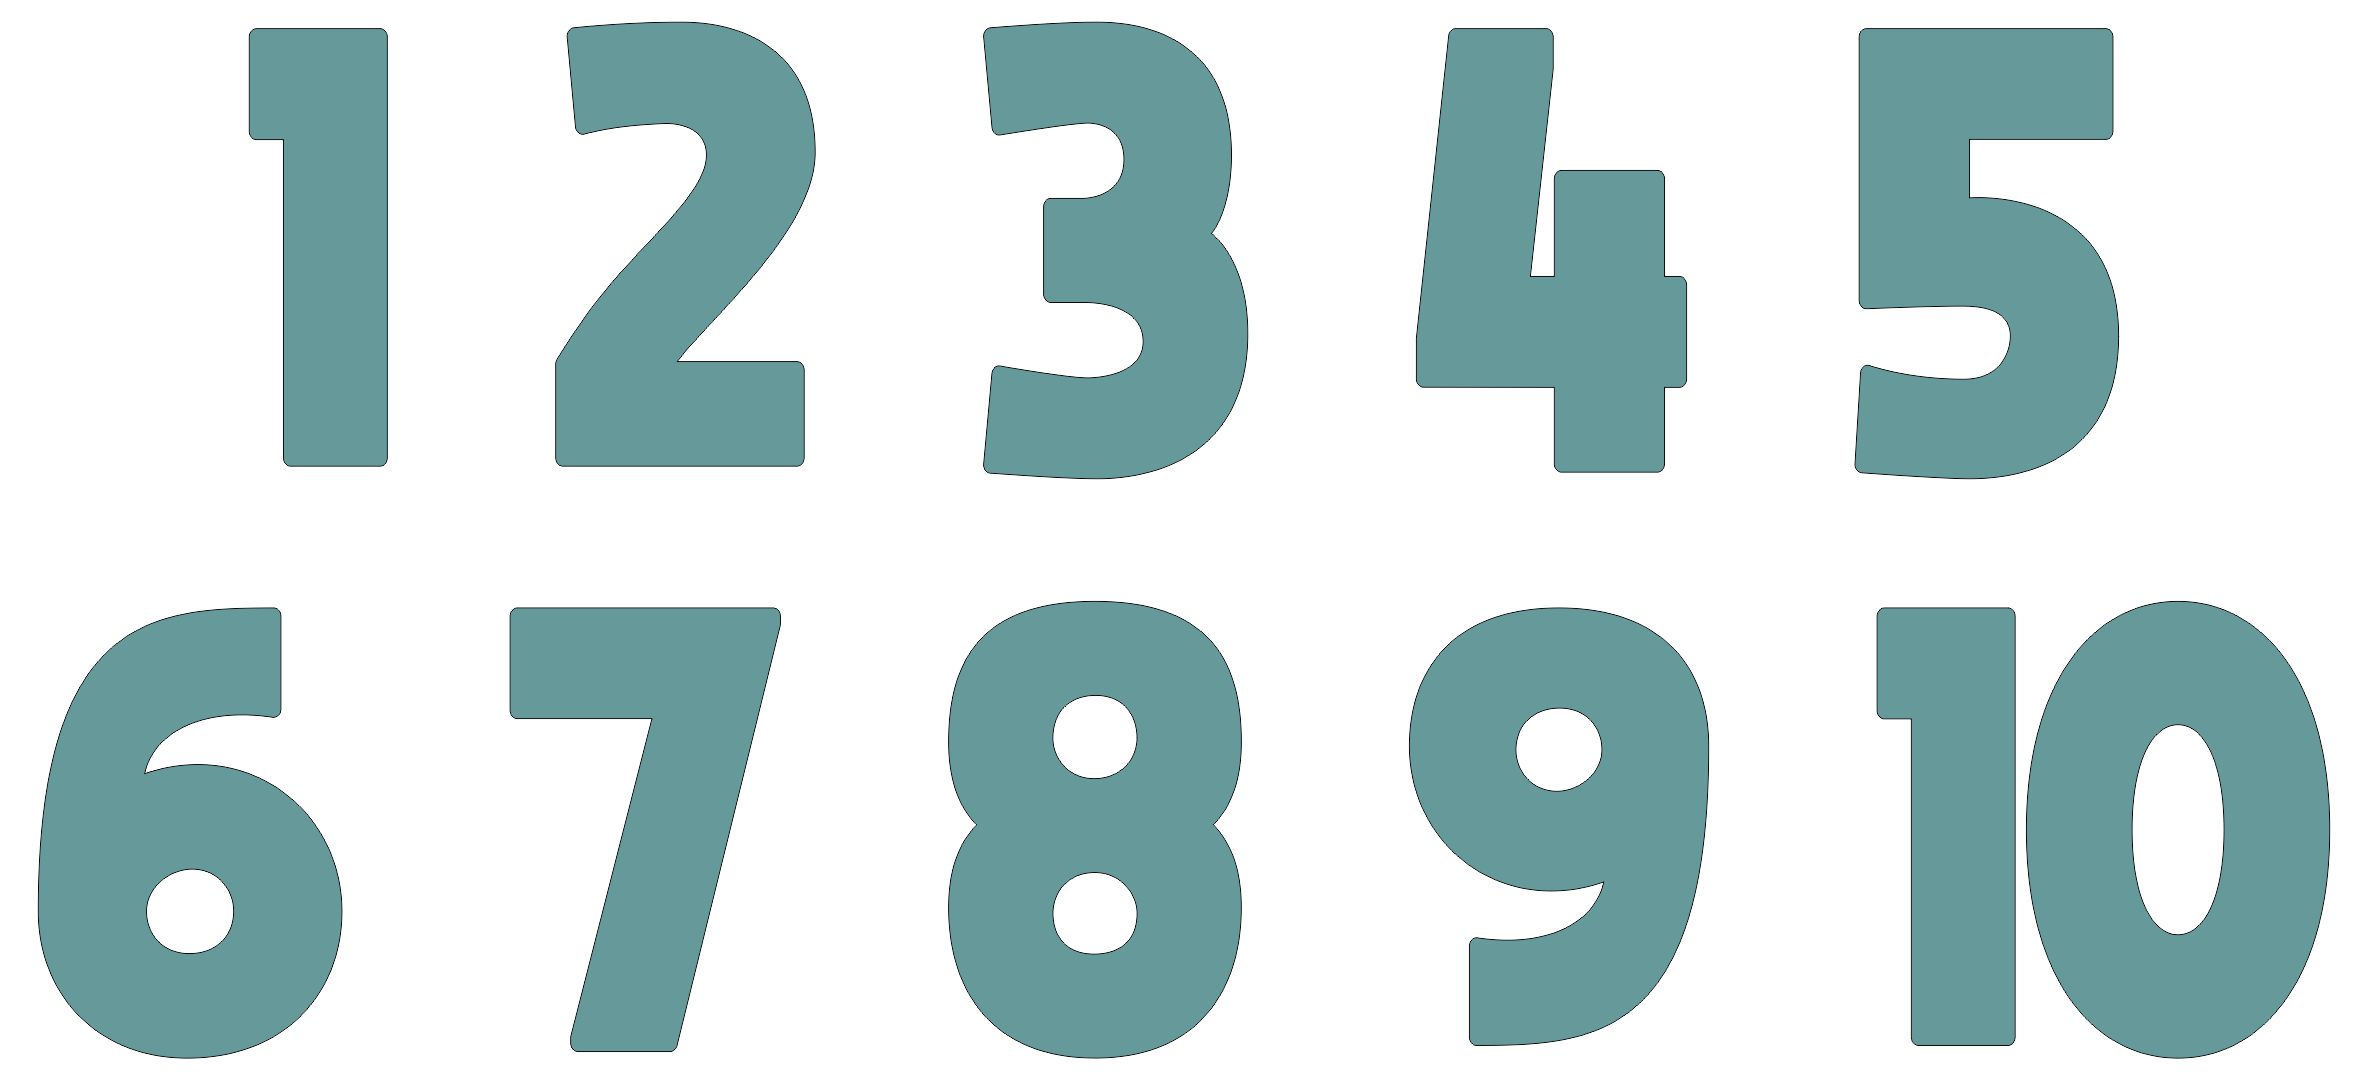 5-tall-number-stencils-for-birthday-banners-house-numbers-mailboxes-and-more-number